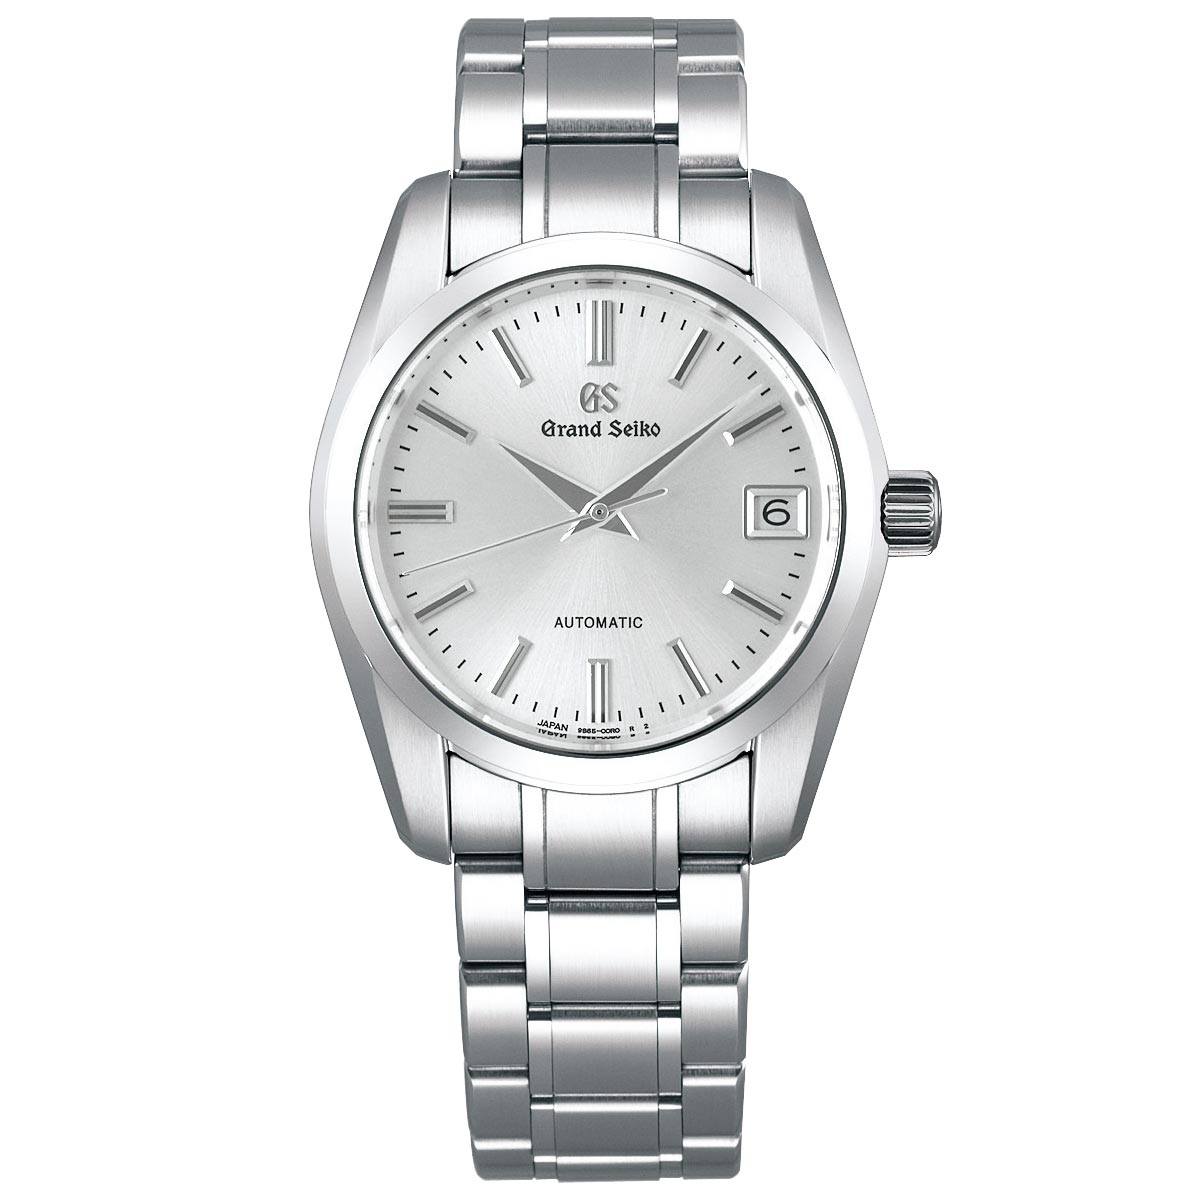 Grand Seiko Heritage Collection Automatic with Manual Winding 3-day Power Reserve 37mm Watch